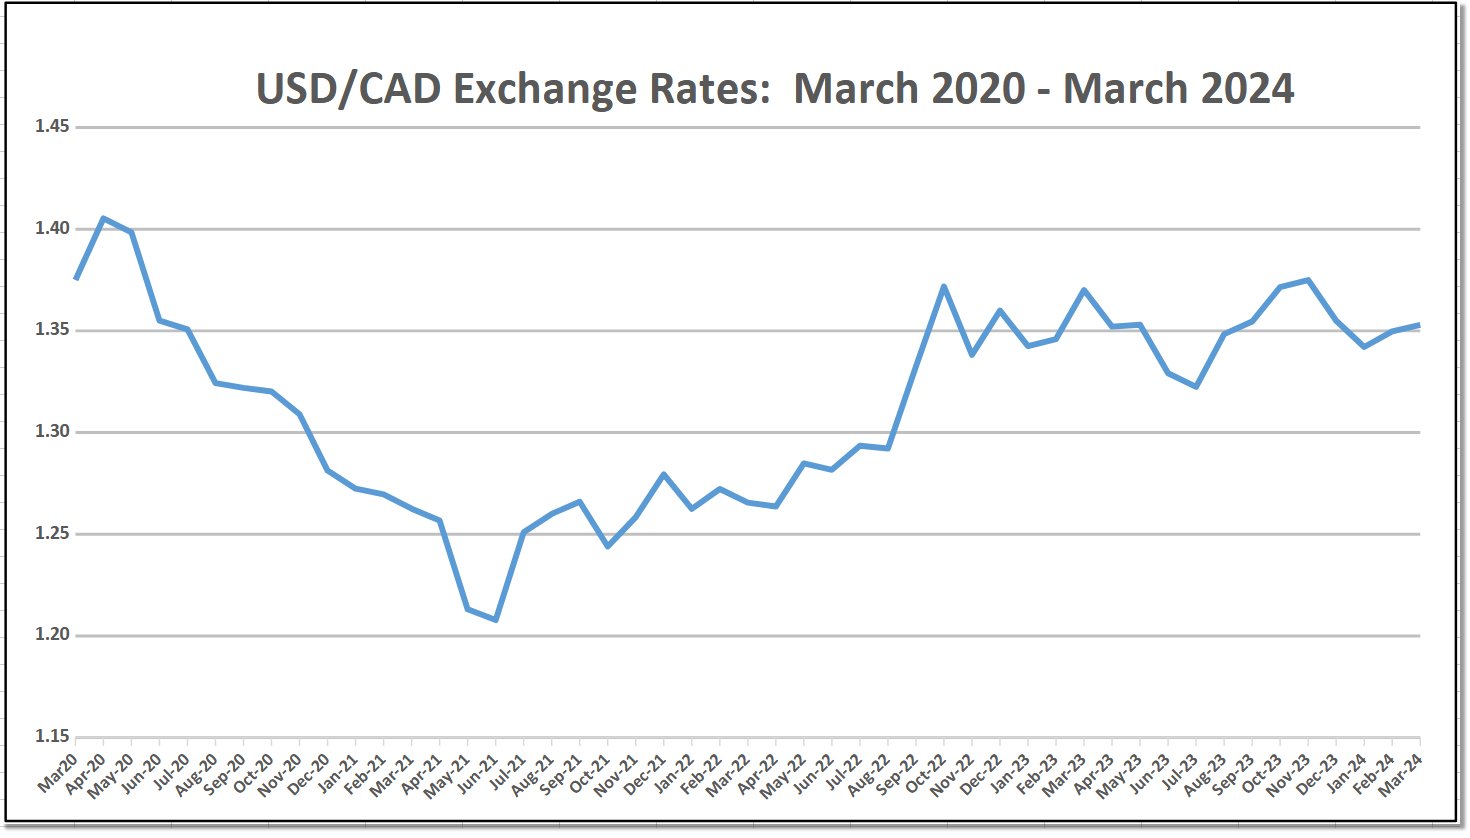 Best time to convert U.S. dollars to Canadian dollars